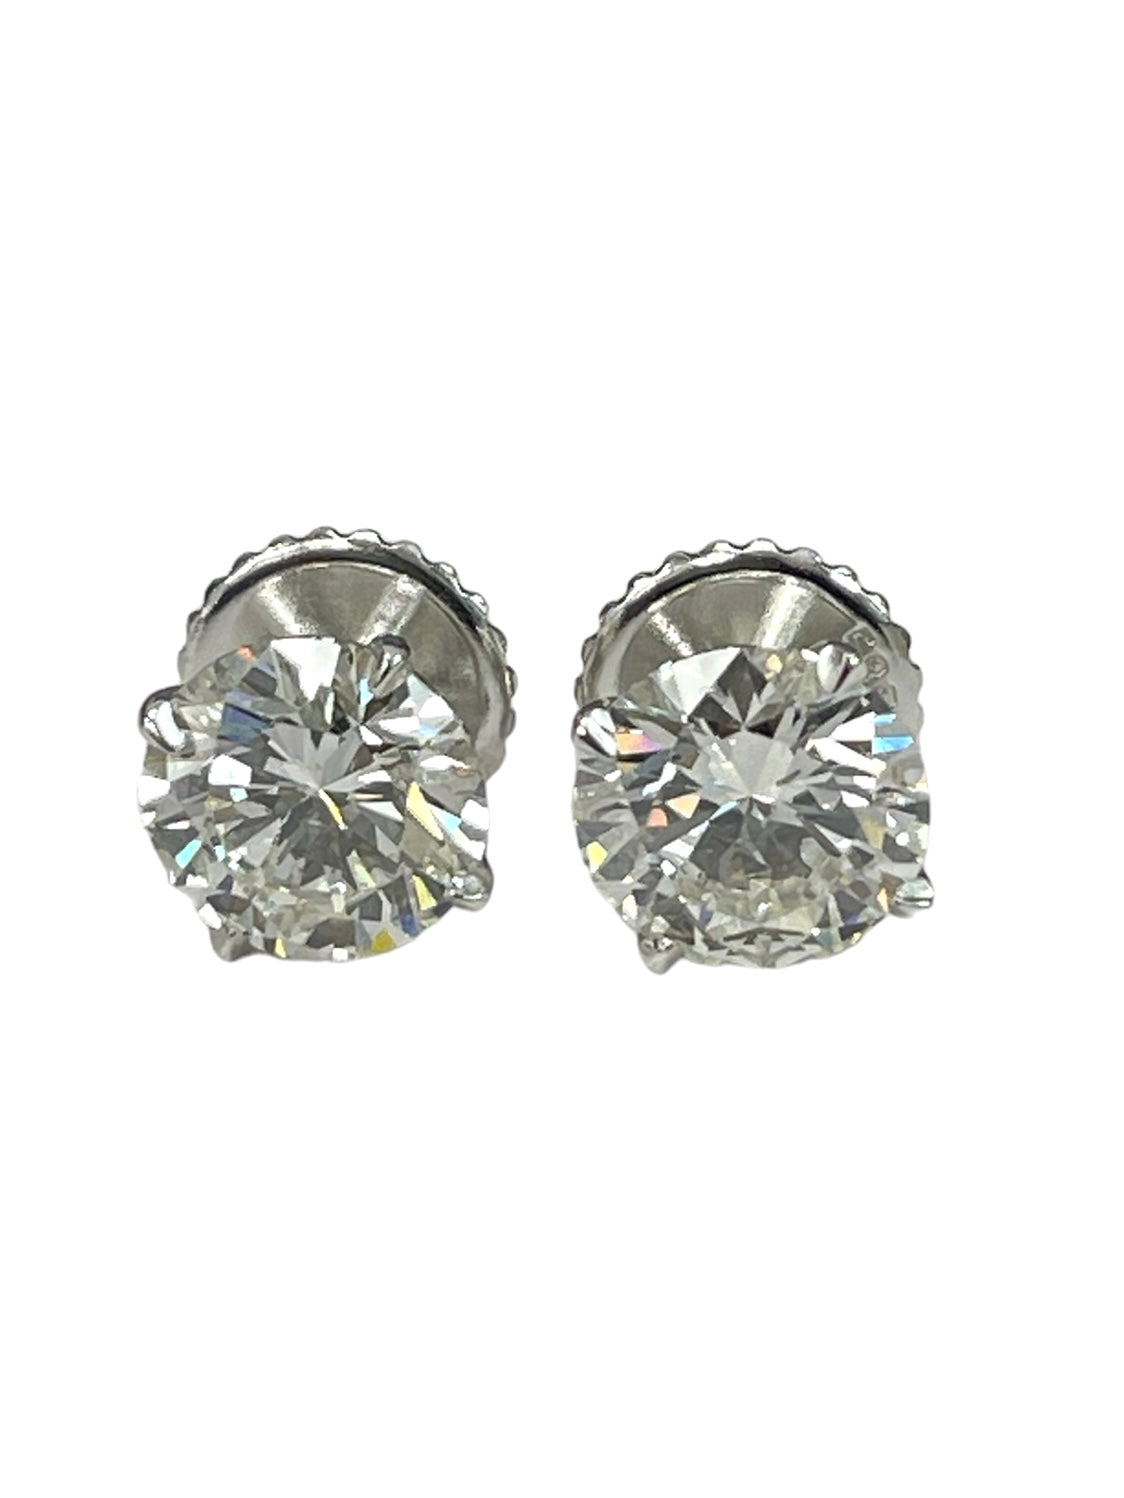 4.54 Carats GIA Certified Round Brilliants Diamond Stud Earrings White Gold